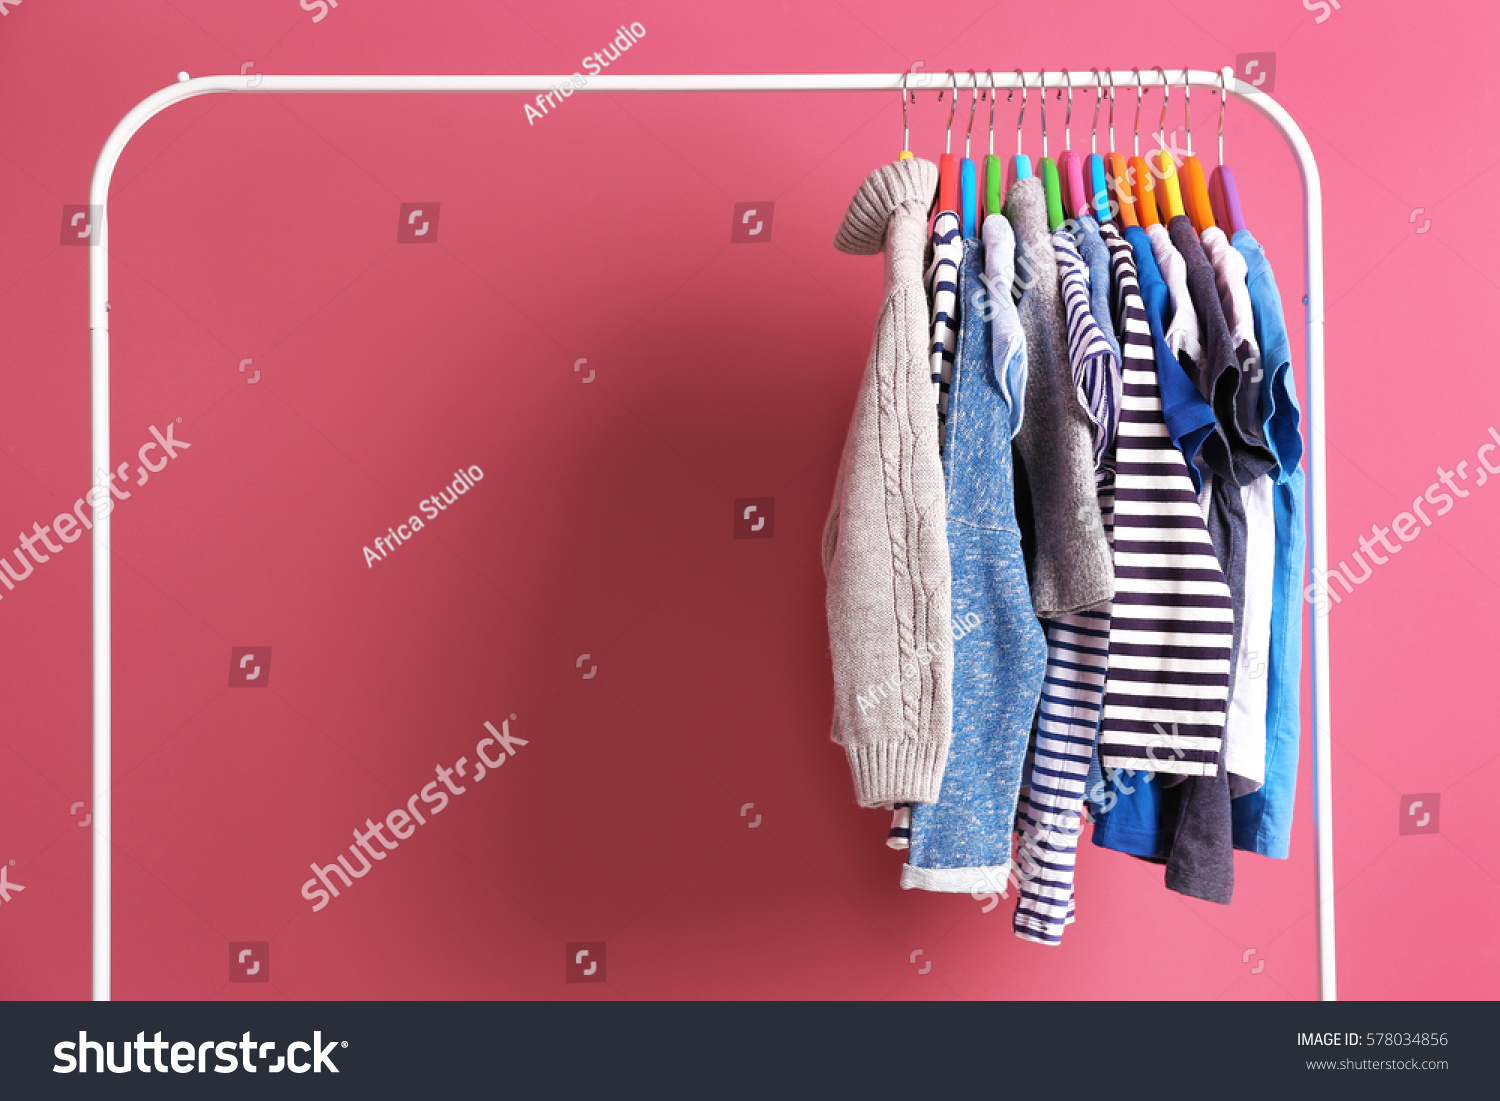 A Clothes Rack Needed to be Filled